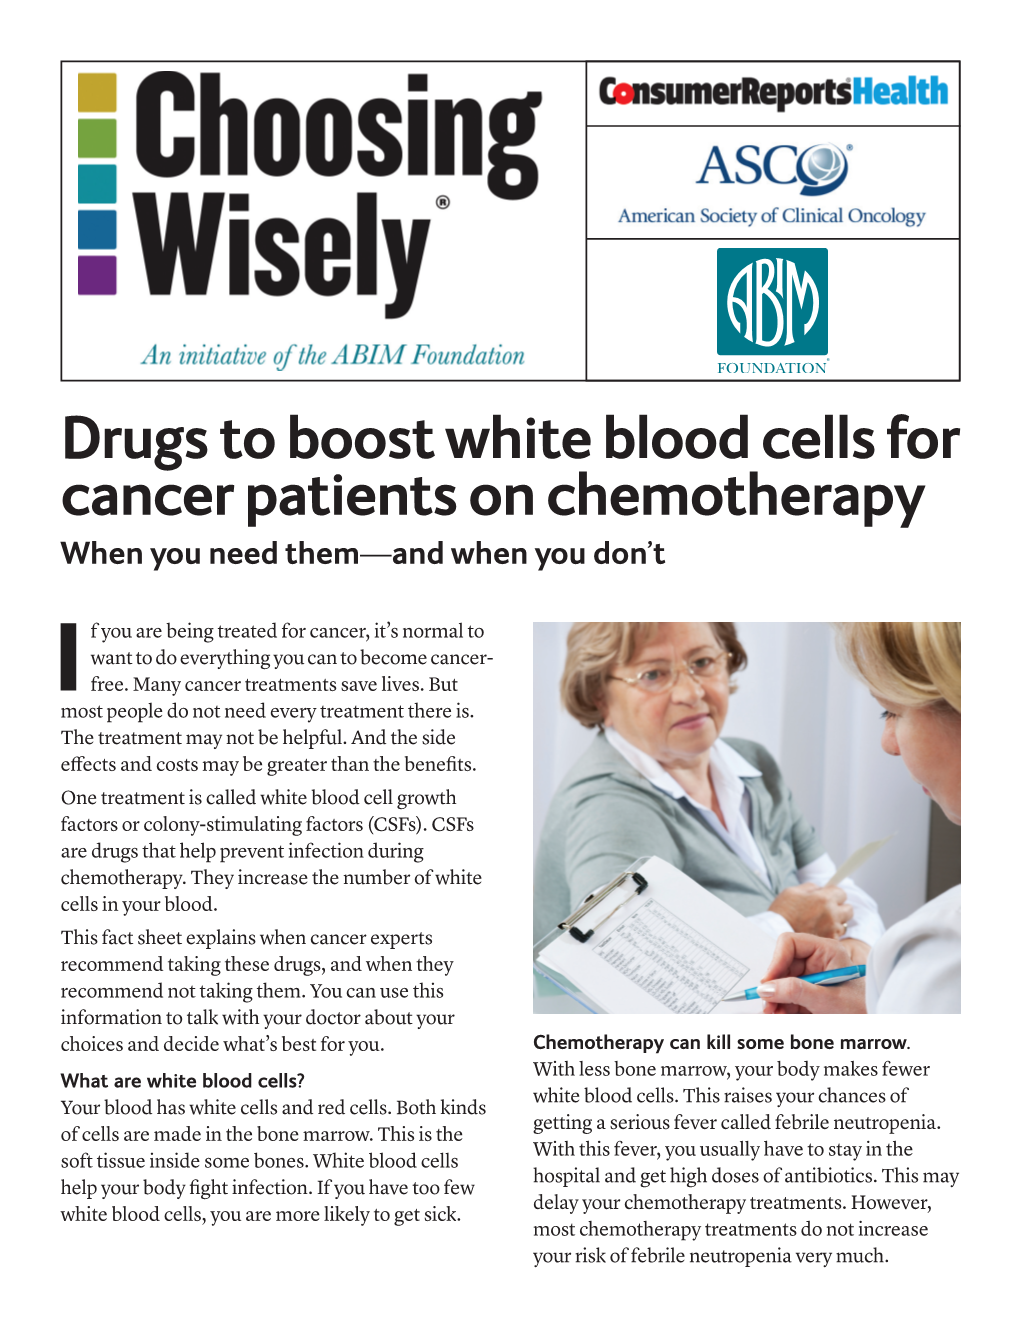 Drugs to Boost White Blood Cells for Cancer Patients on Chemotherapy When You Need Them—And When You Don’T